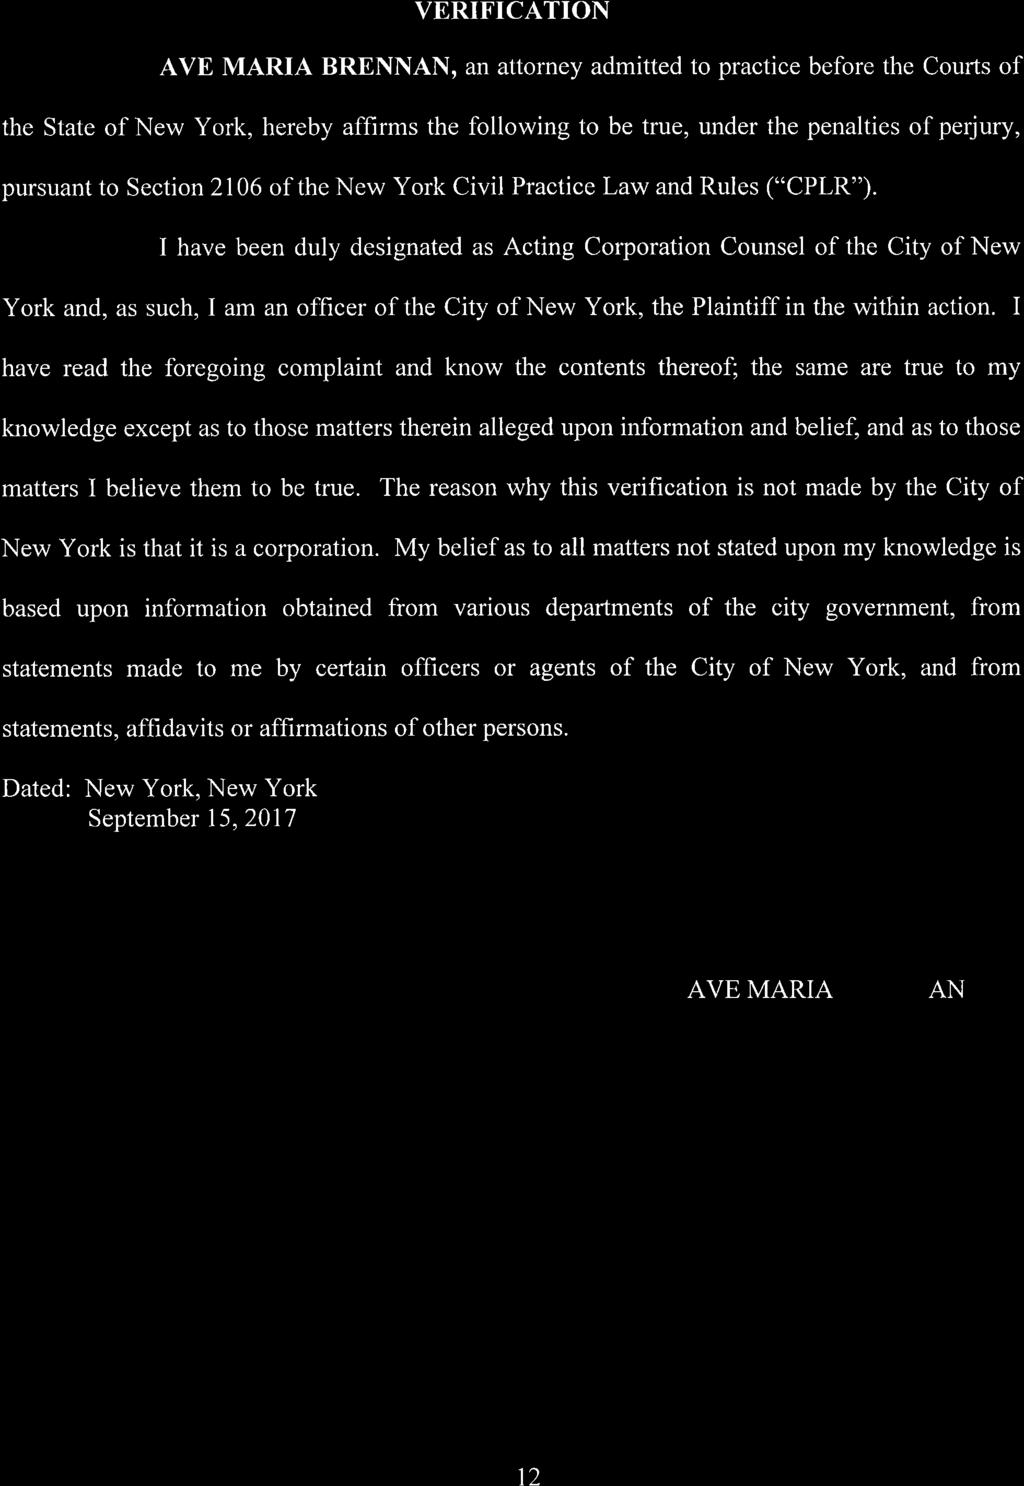 VERIFICATION AVE MARIA BRENNAN, an attorney admitted to practice before the Courts of the State of New York, hereby affirms the following to be true, under the penalties of perjury, pursuant to